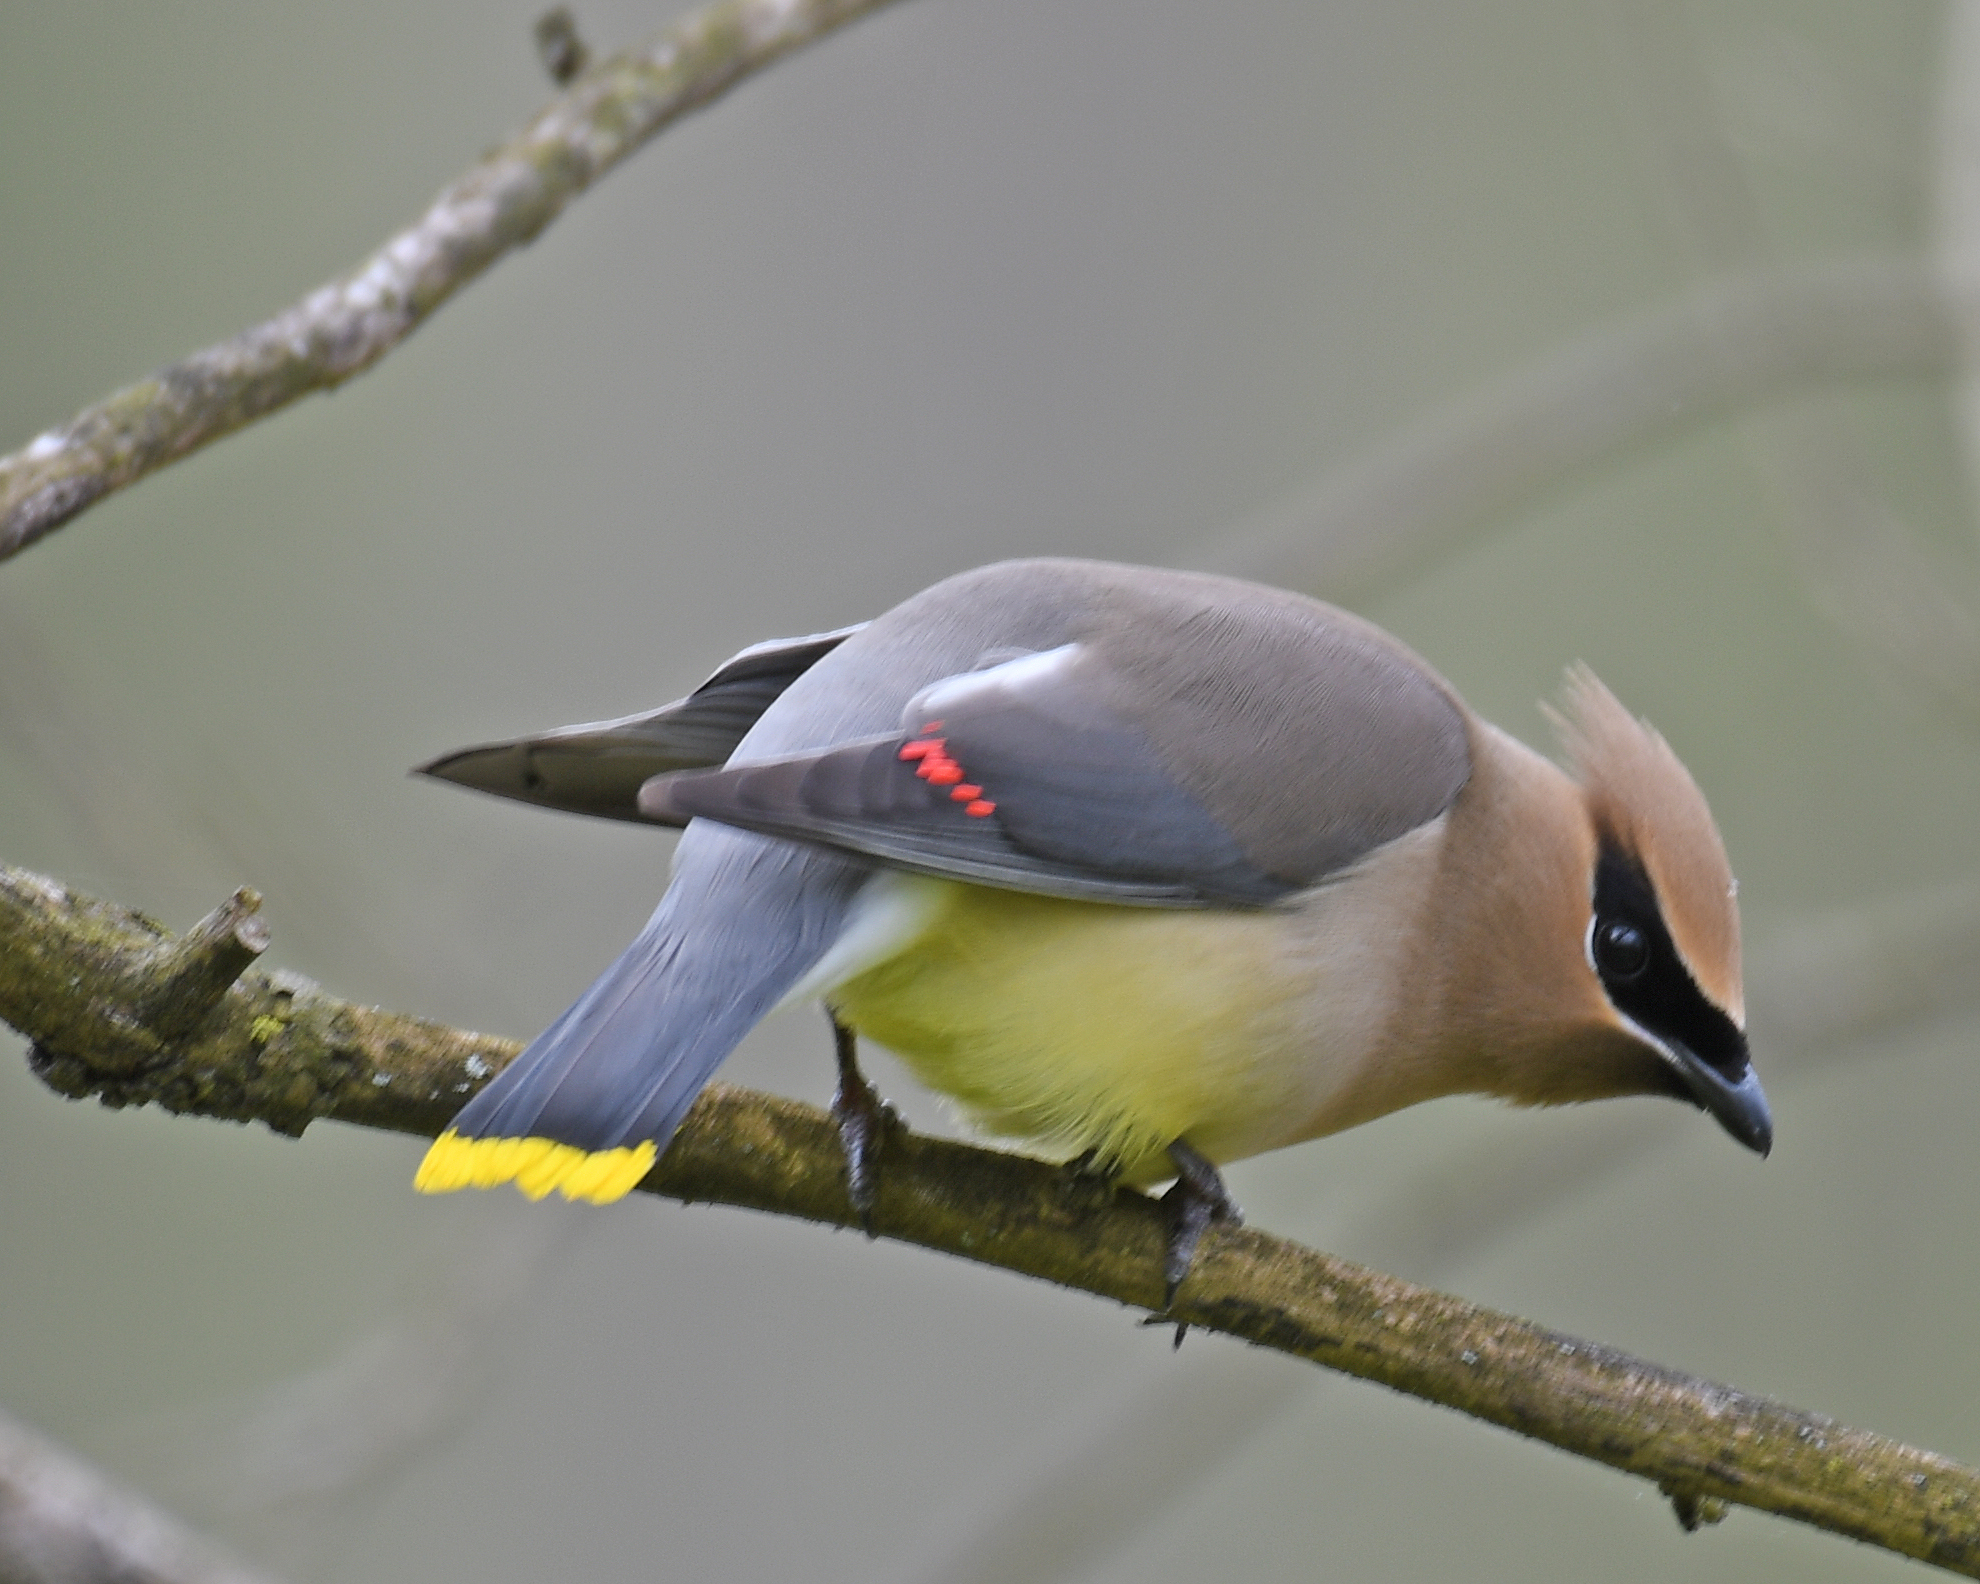 Rump-on view of a Cedar Waxwing displaying all the colorful markings of this beautiful songbird. Slate-grey back with tailfeathers tipped in bright yellow. Red tips of secondary flight feathers peek out from folded wings. Soft yellow green breast, salmon-brown head and feather crest, and a rakish, black bandit-mask with thin white outline.